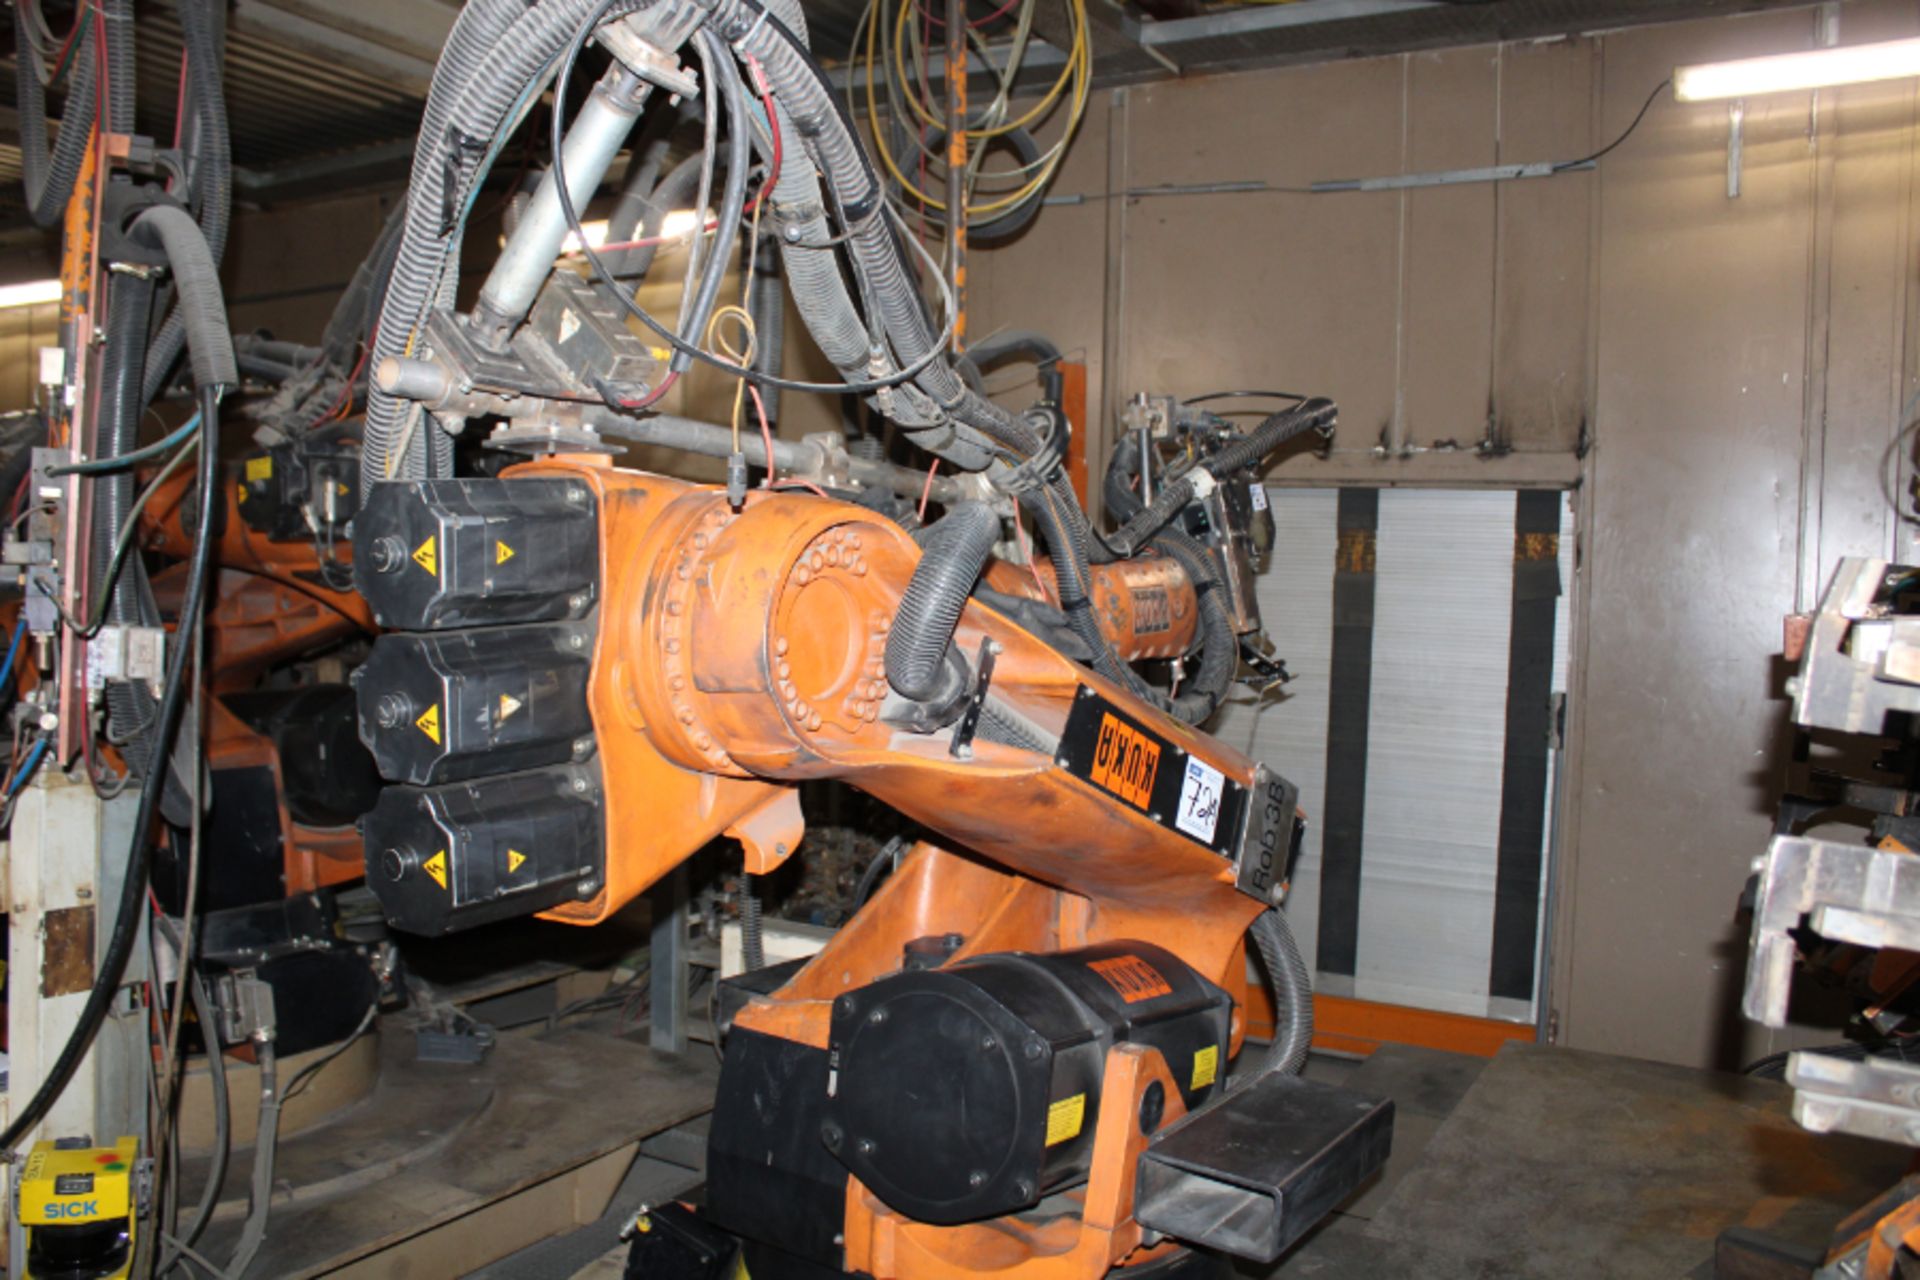 Kuka KR-150 Robot, Maximum Reach: 2,700 mm, Rated Payload: 150 Kg, with Robot Controller, New 2003 - Image 4 of 11